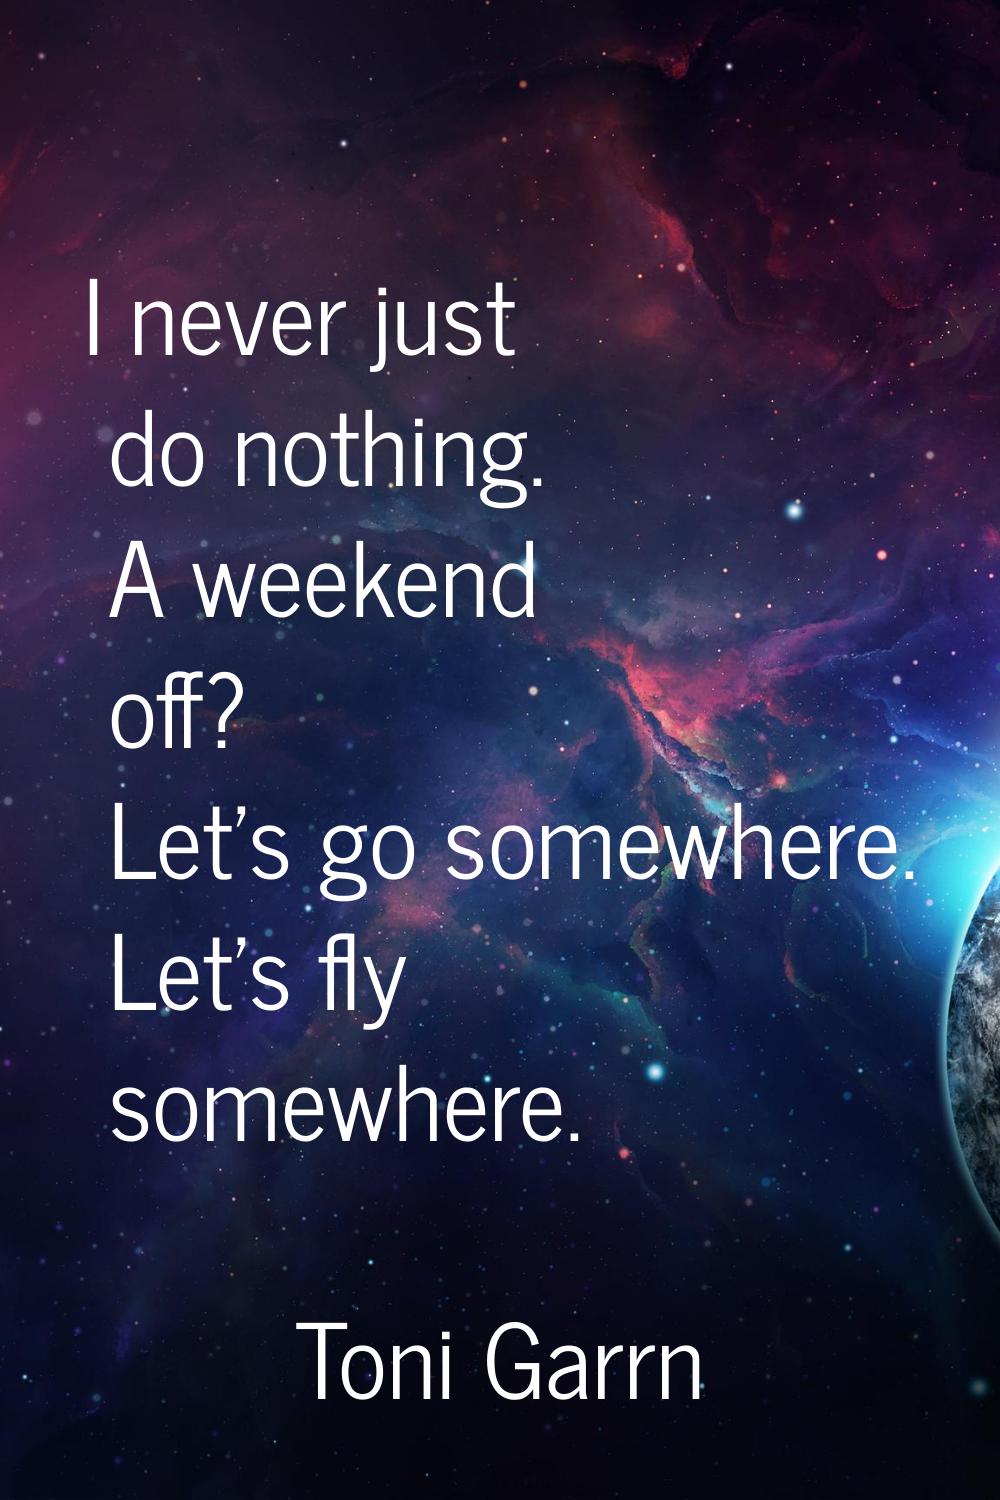 I never just do nothing. A weekend off? Let's go somewhere. Let's fly somewhere.